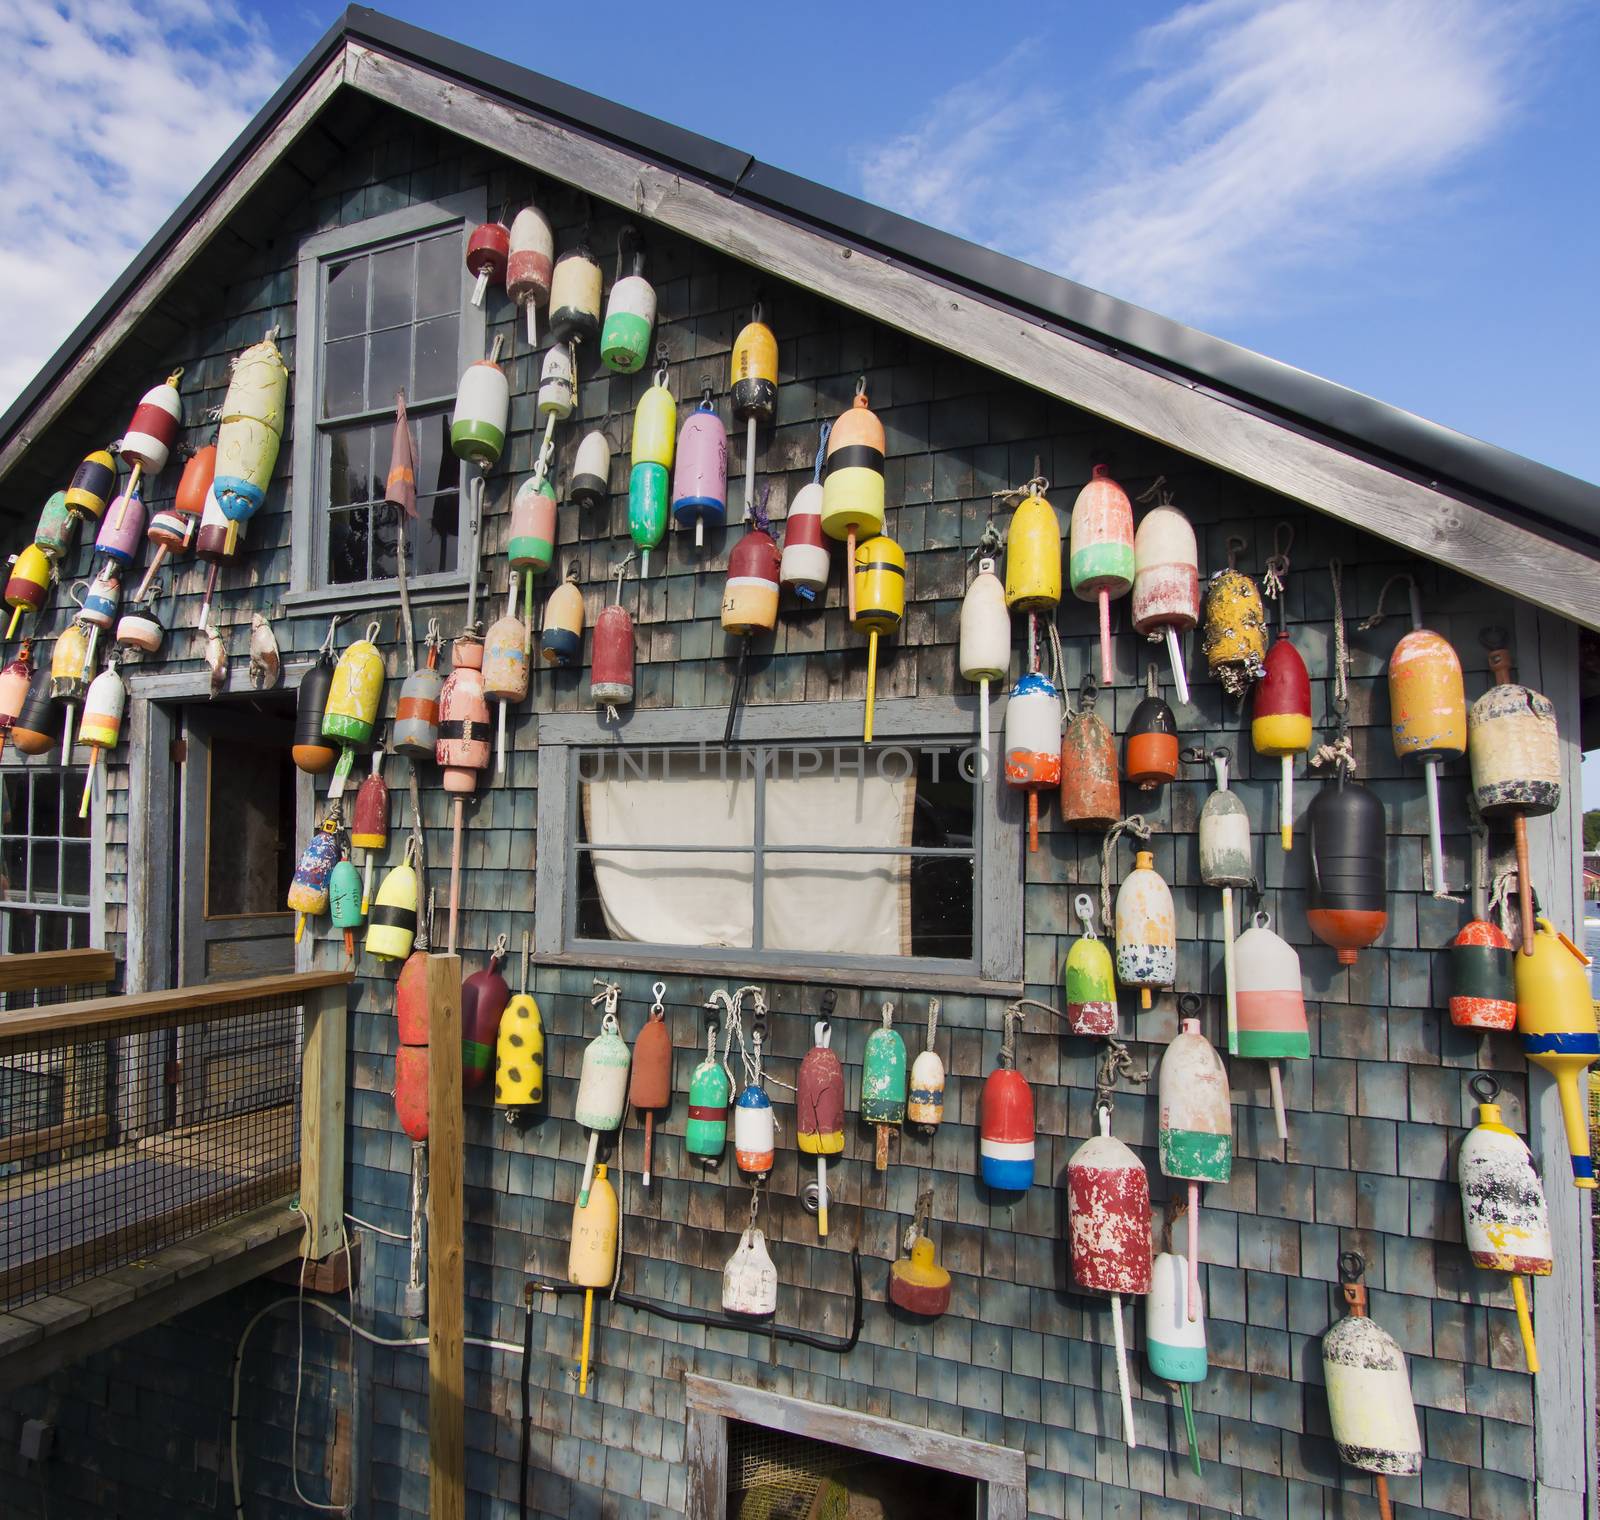 Maine lobster pound shack is decorated with old buoys, traps, and netting.